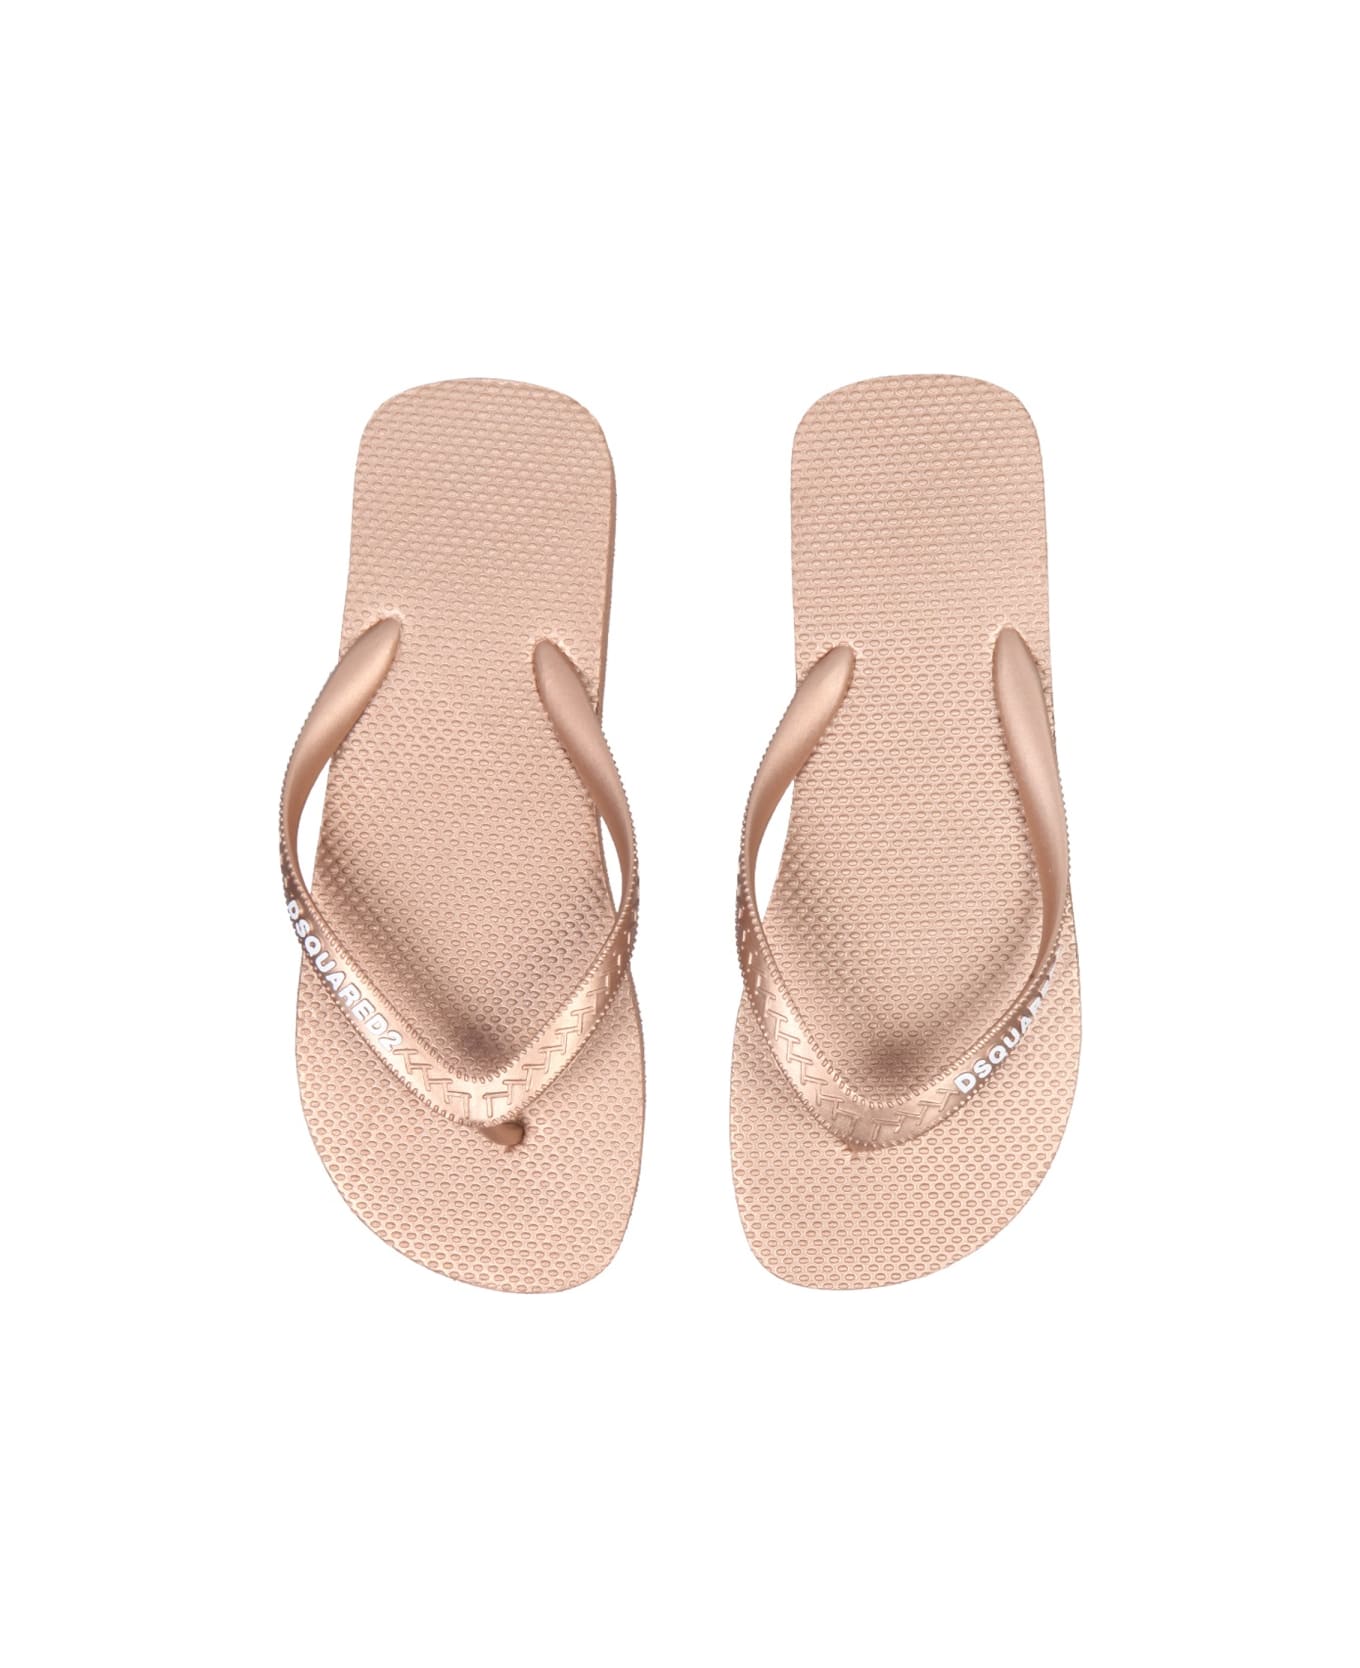 Dsquared2 Rubber Thong Sandals - PINK